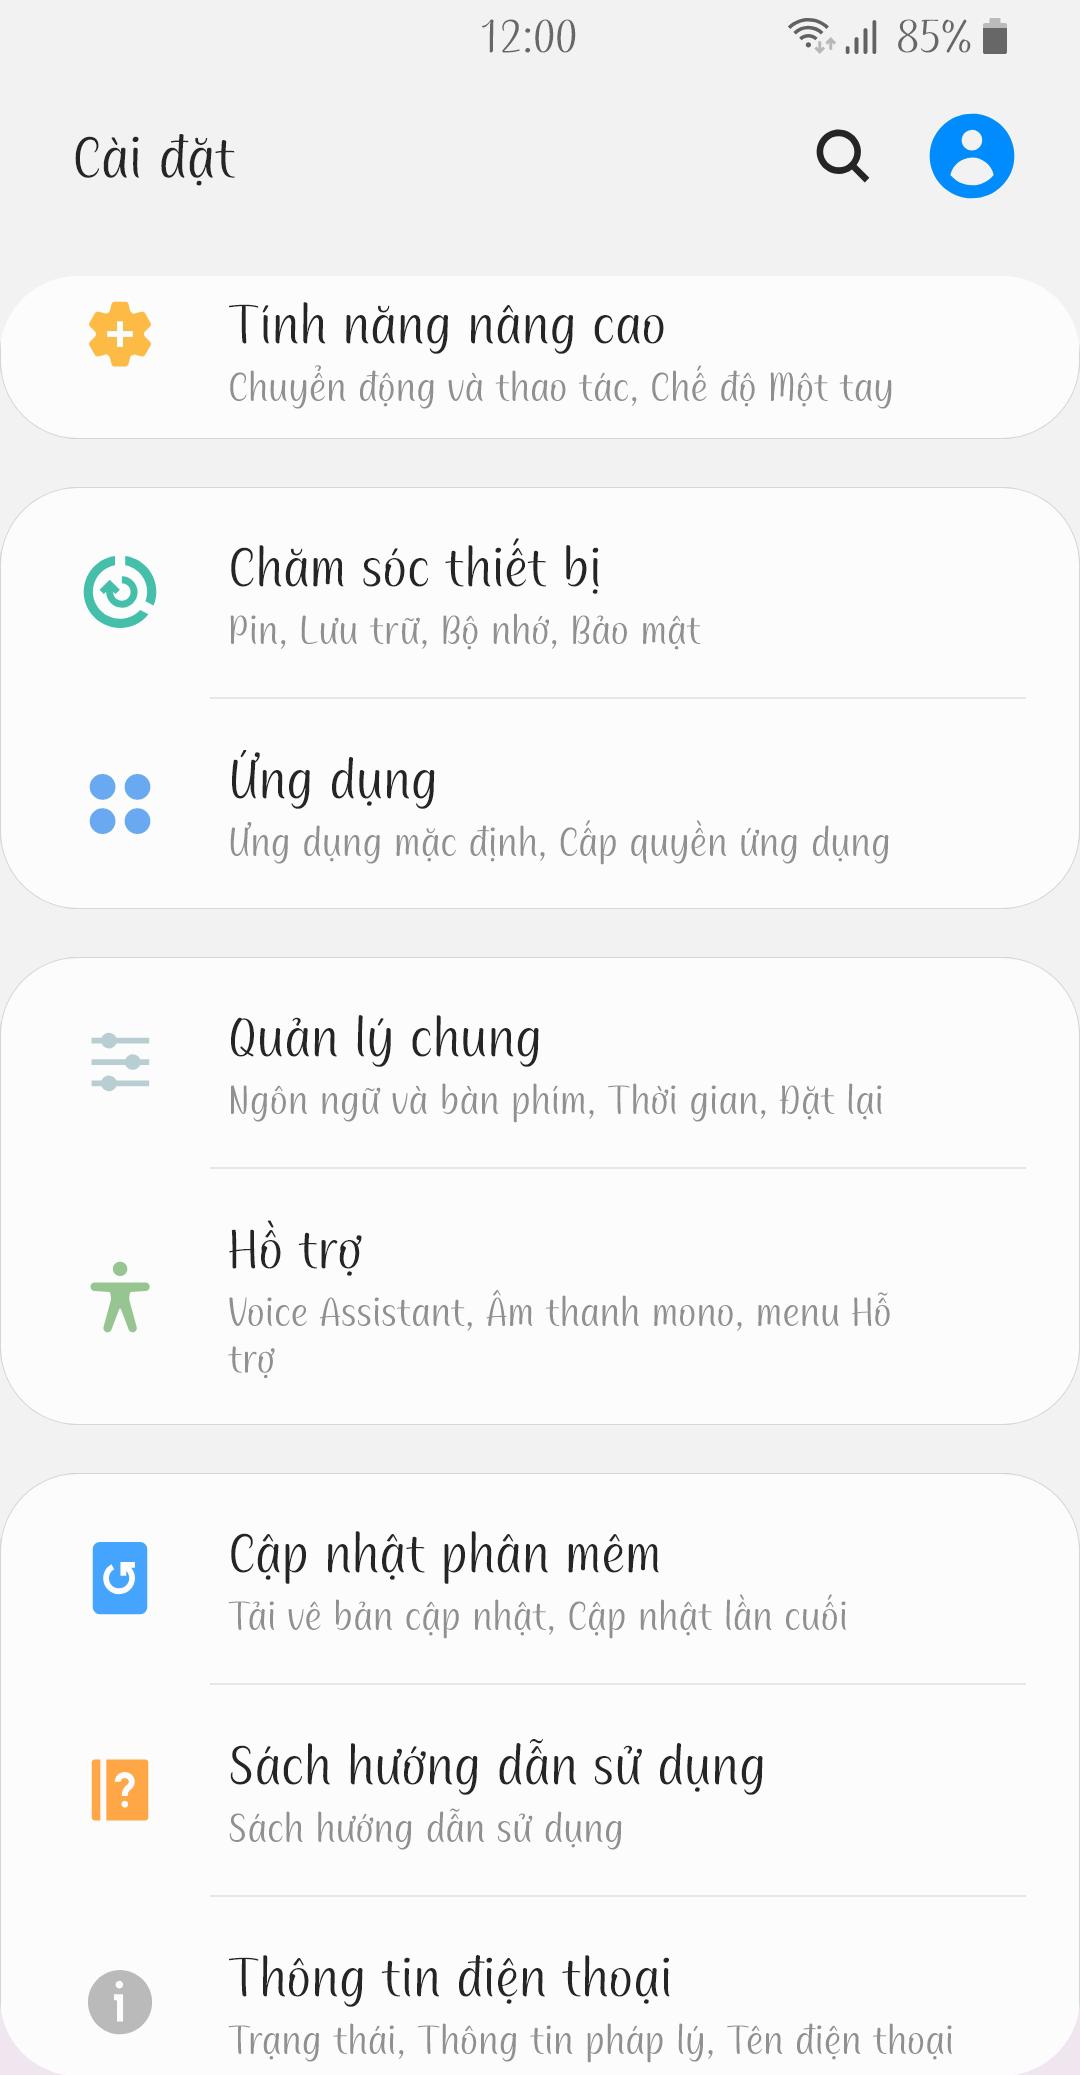 Zf Adagio™ Vietnamese Flipfont Latest Version 1.0 For Android